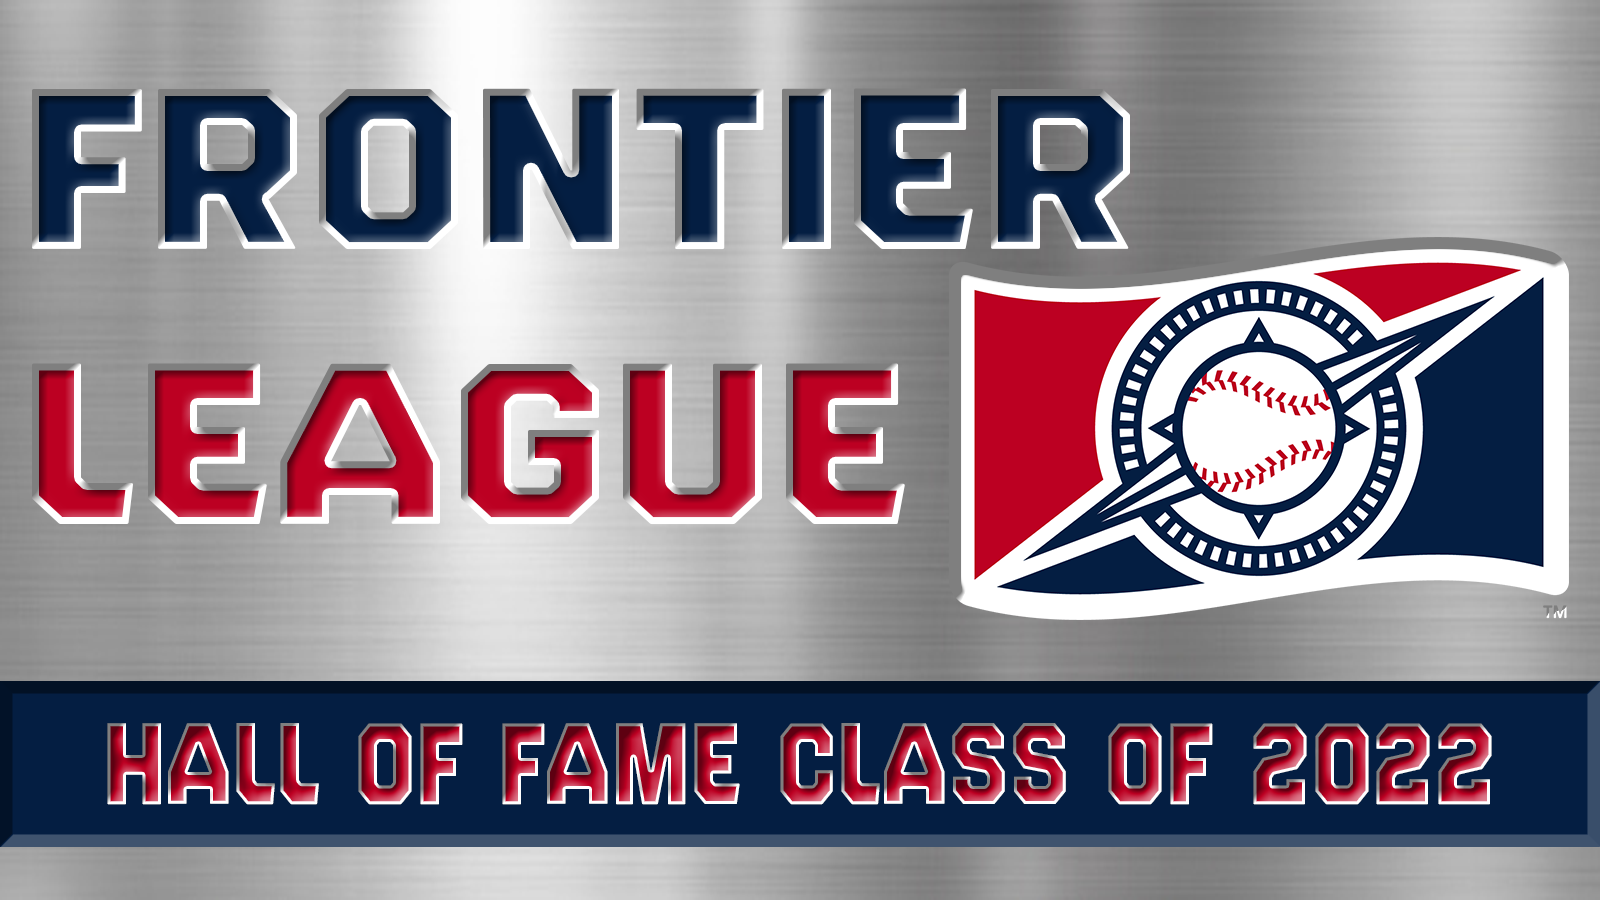 2022 FRONTIER LEAGUE HALL OF FAME INDUCTEES